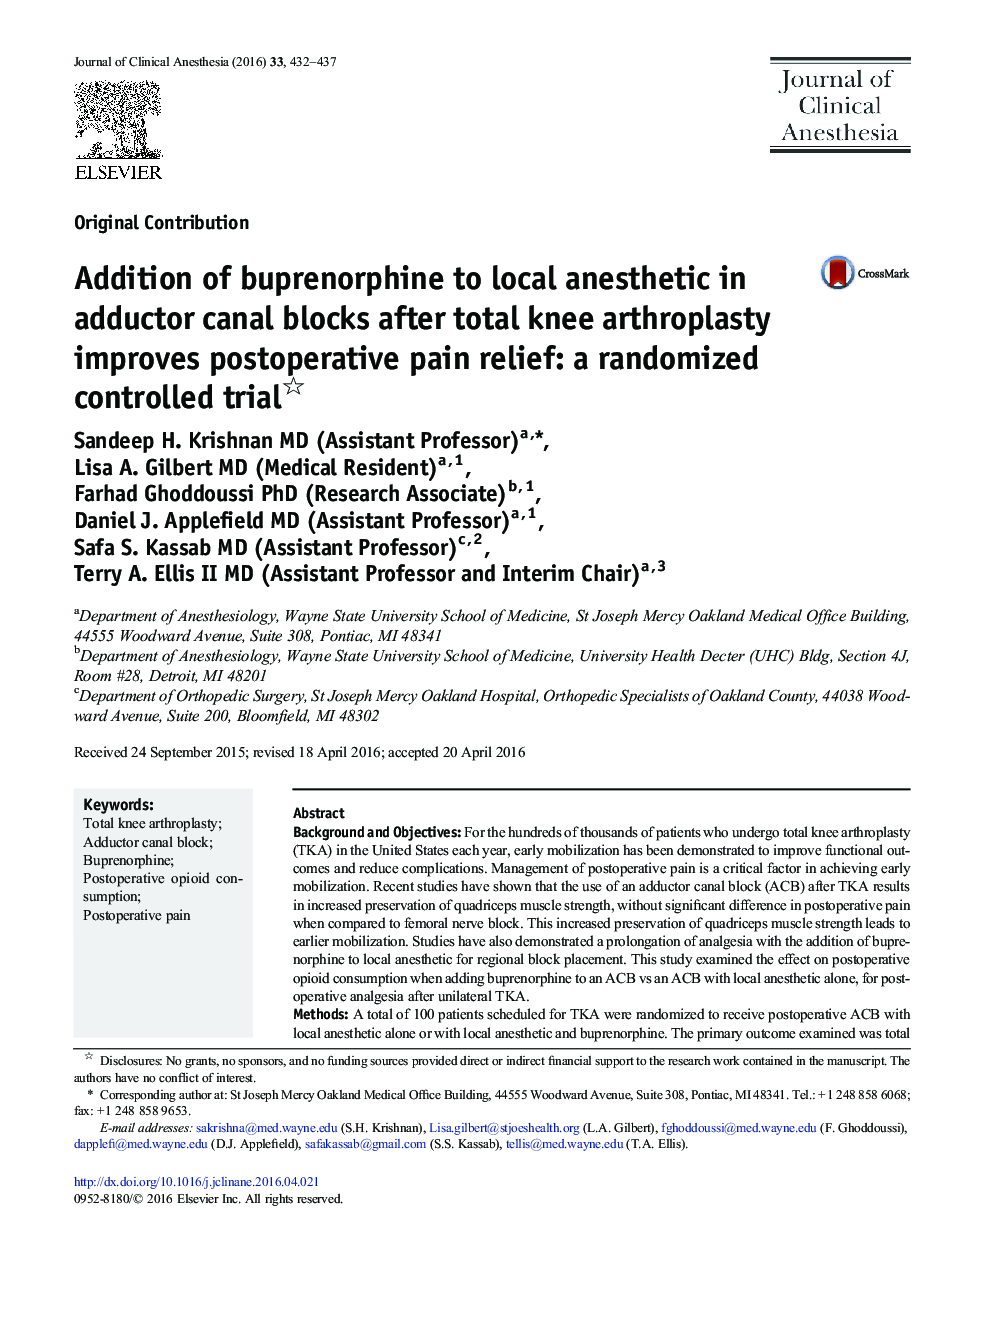 Addition of buprenorphine to local anesthetic in adductor canal blocks after total knee arthroplasty improves postoperative pain relief: a randomized controlled trial 